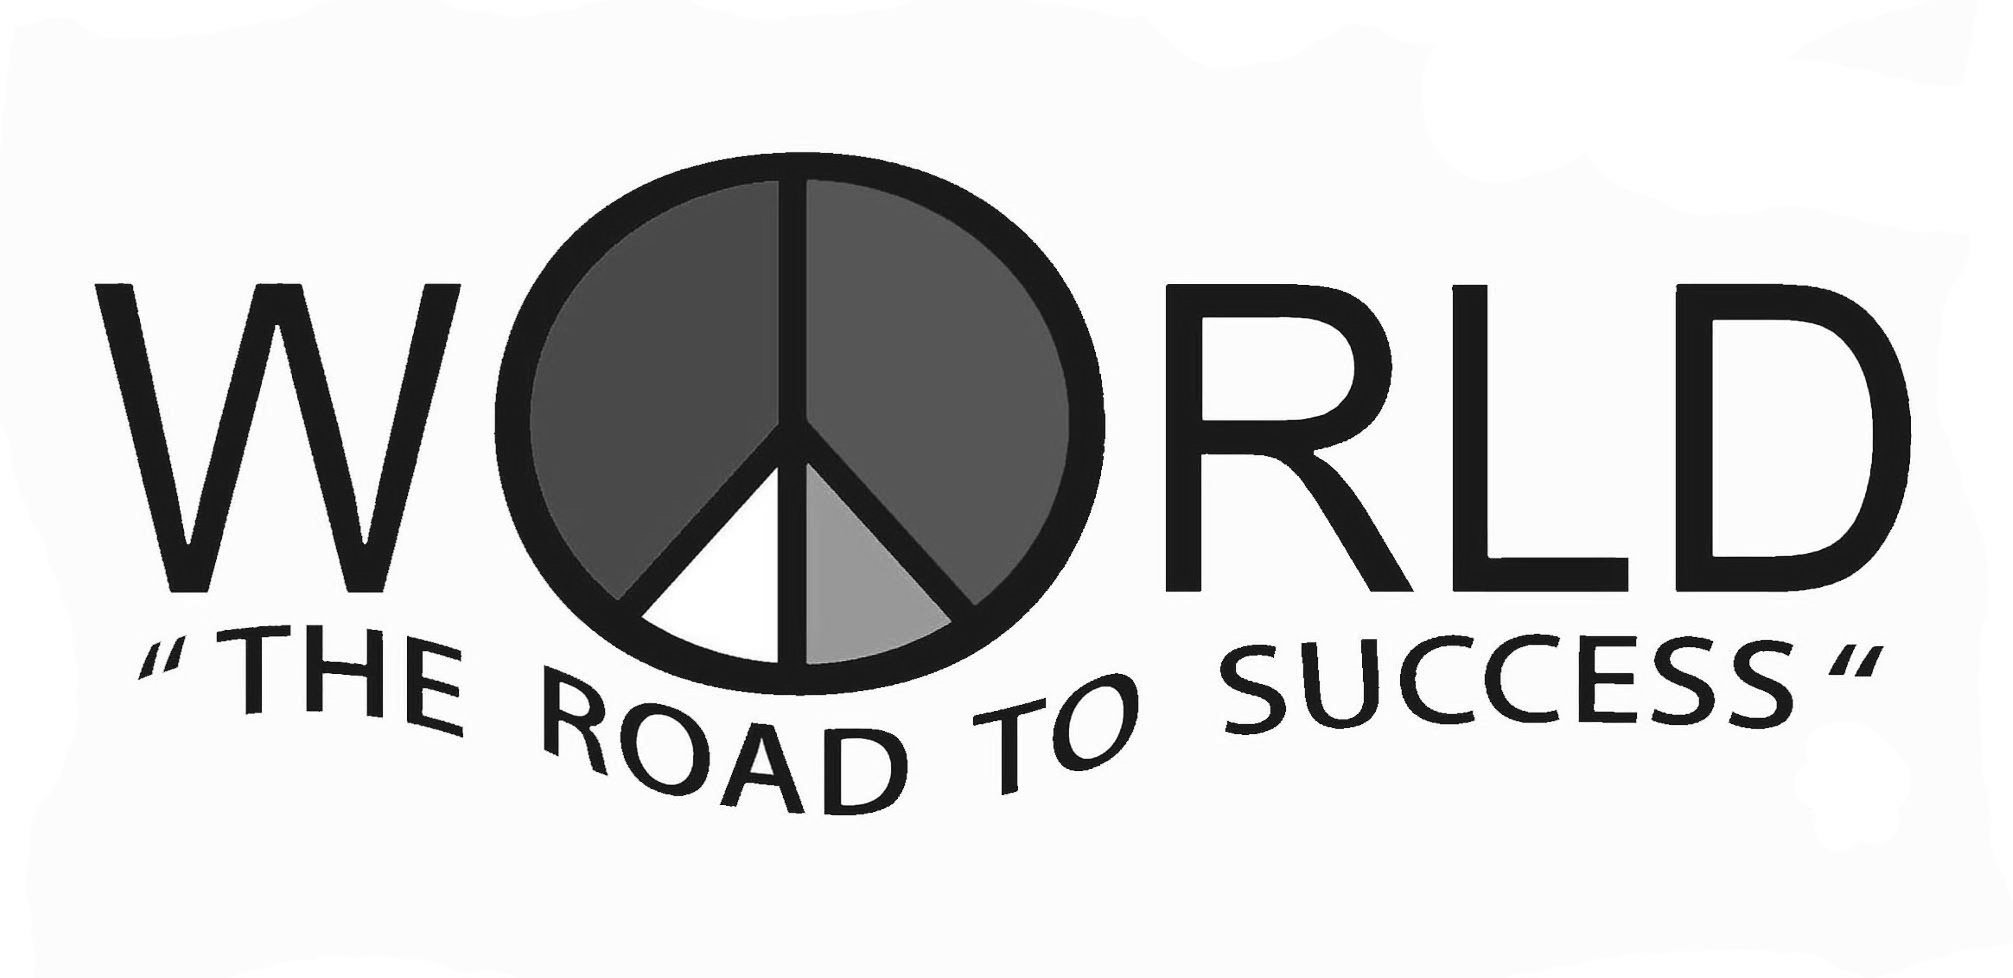  WORLD "THE ROAD TO SUCCESS"